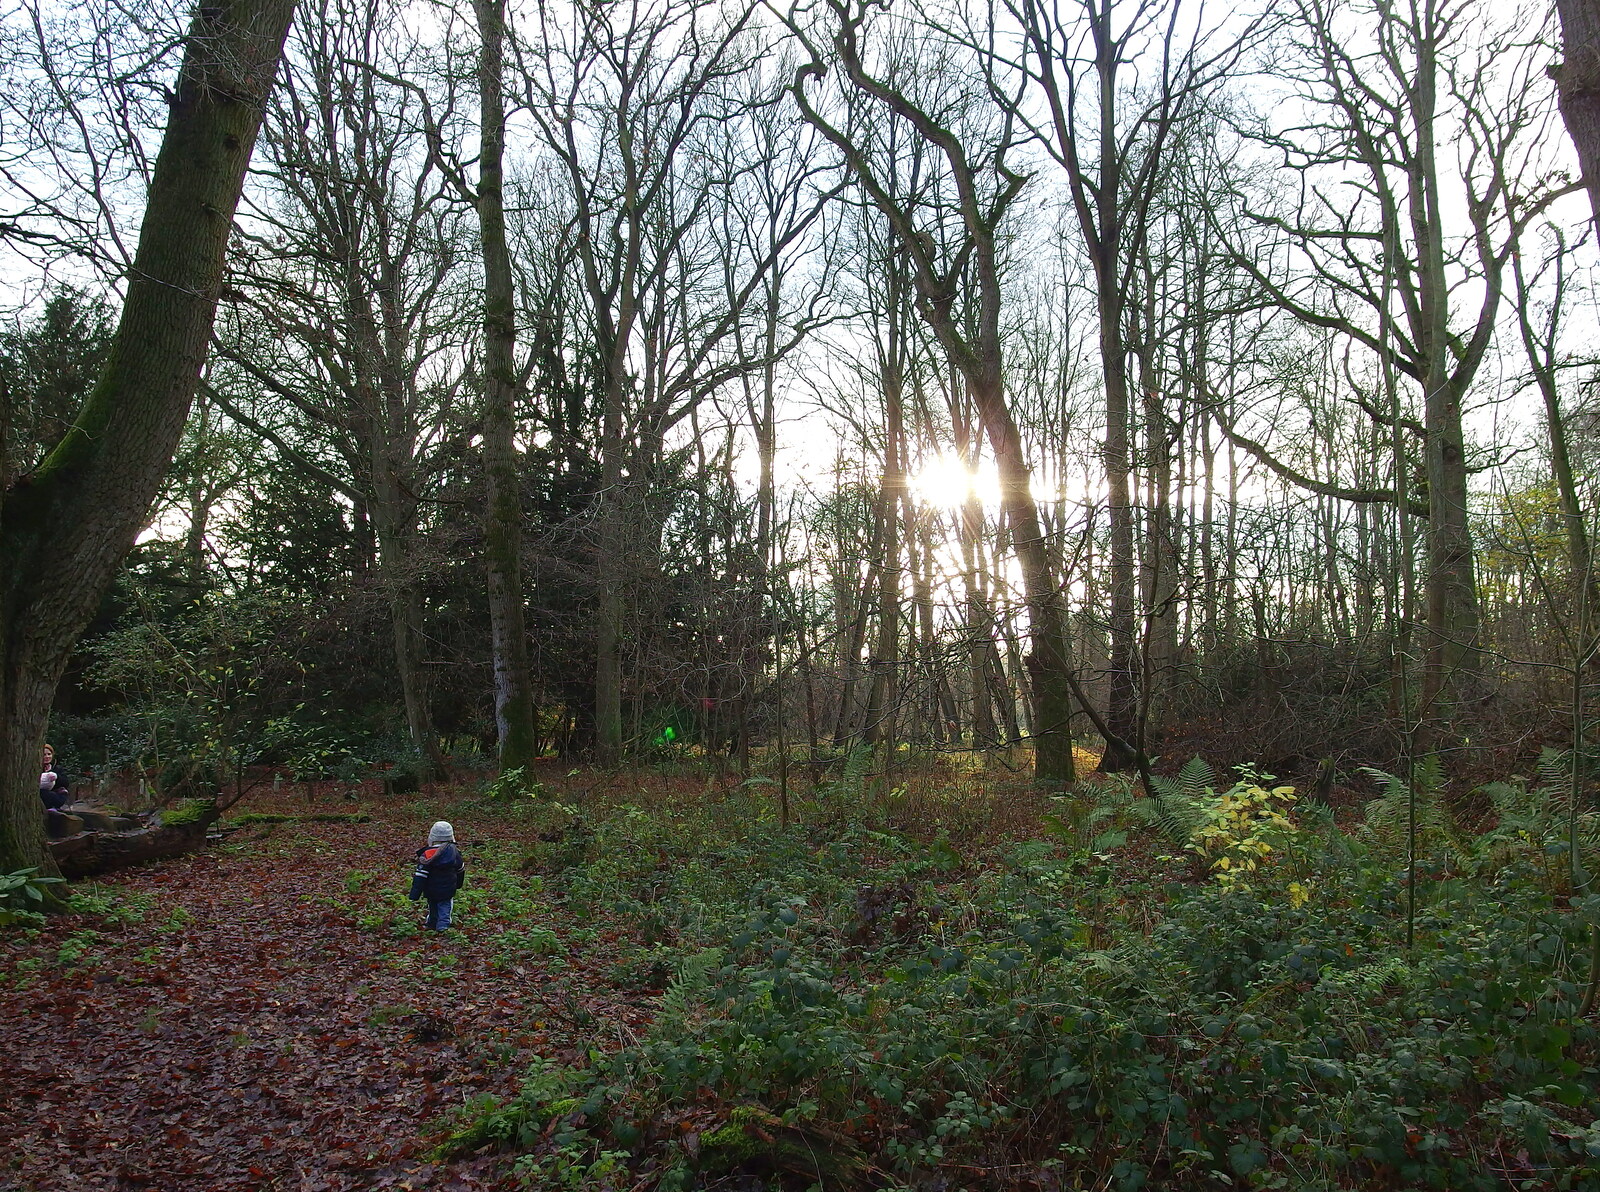 Harry in the woods from A Boxing Day Walk, Thornham Estate, Suffolk - 26th December 2013